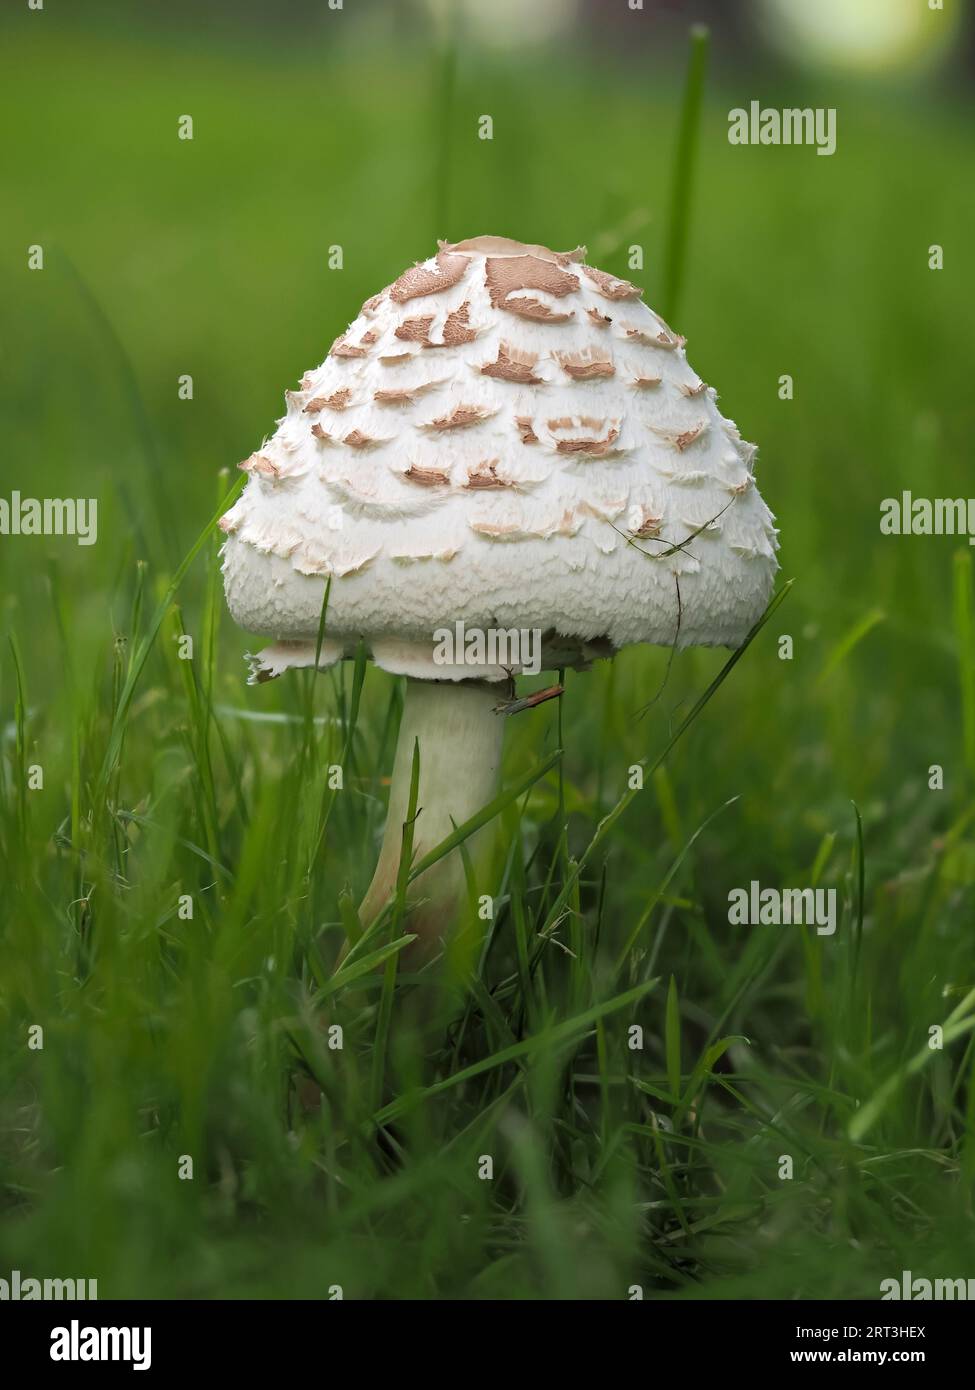 Chlorophyllum rhacodes, a white mushroom covered with large brown, strongly protruding scales, a lamellar mushroom from the Agaridaceae family, a youn Stock Photo